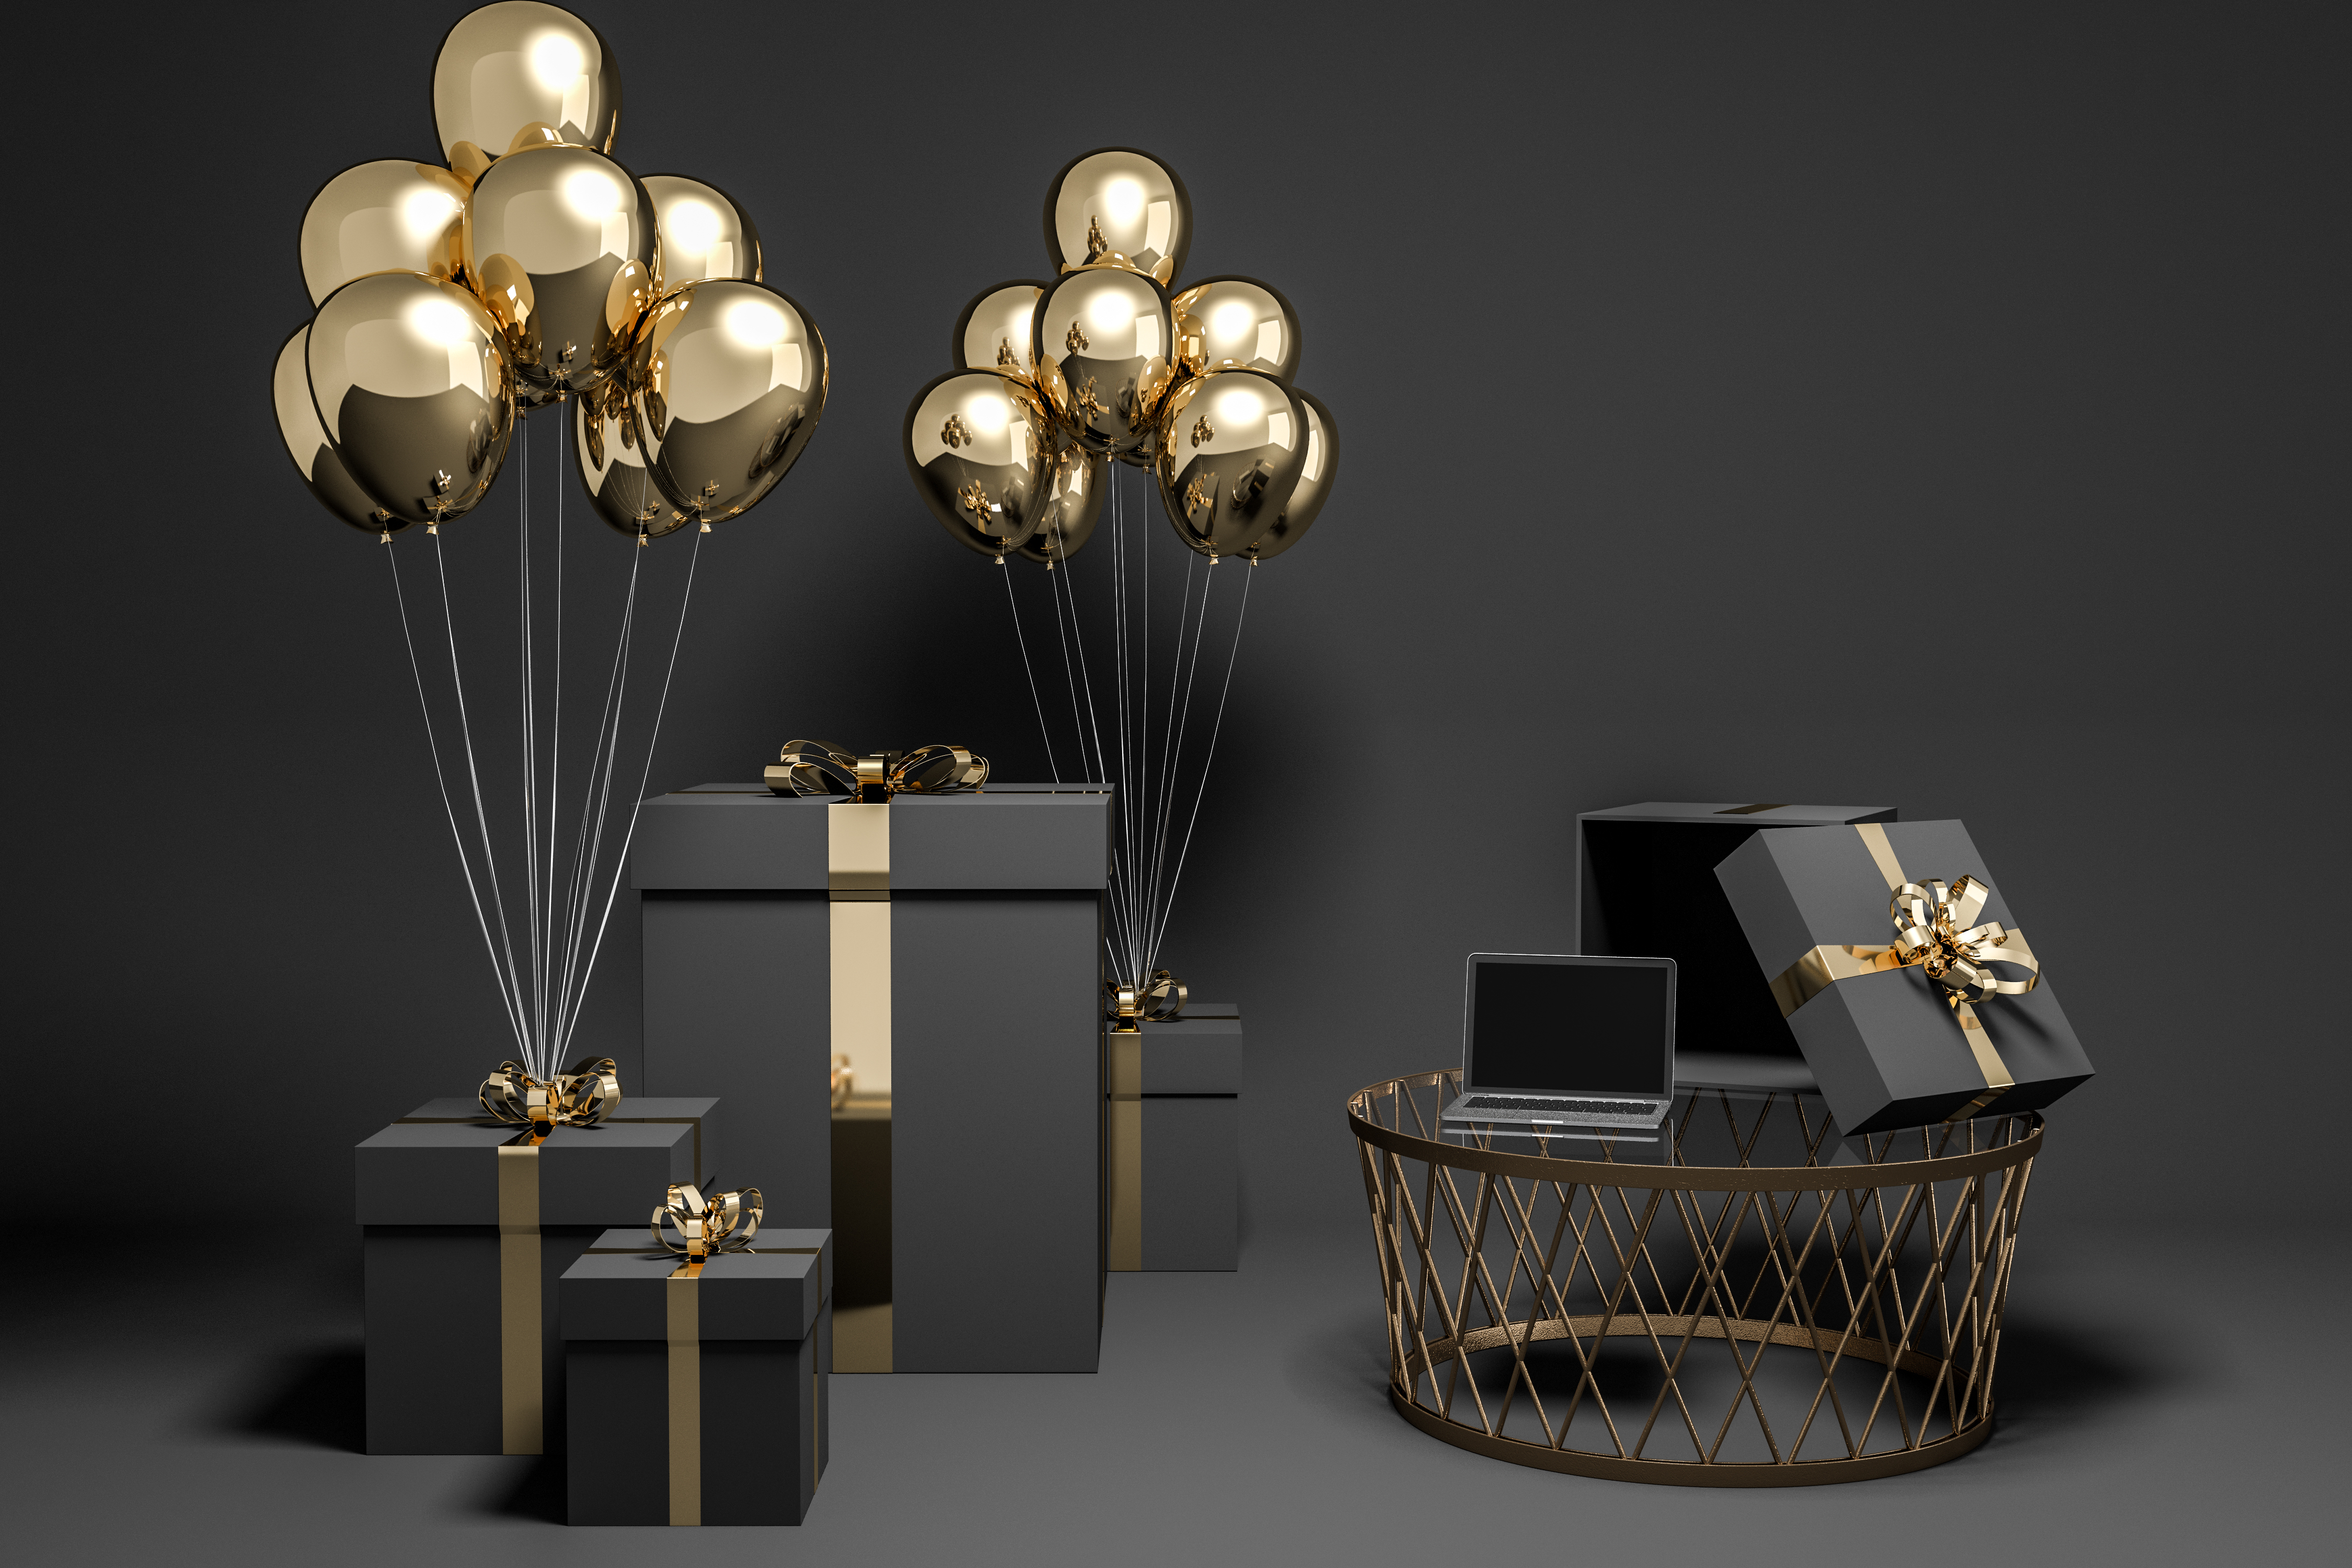 Luxe Gifts for the Woman Who Has Everything